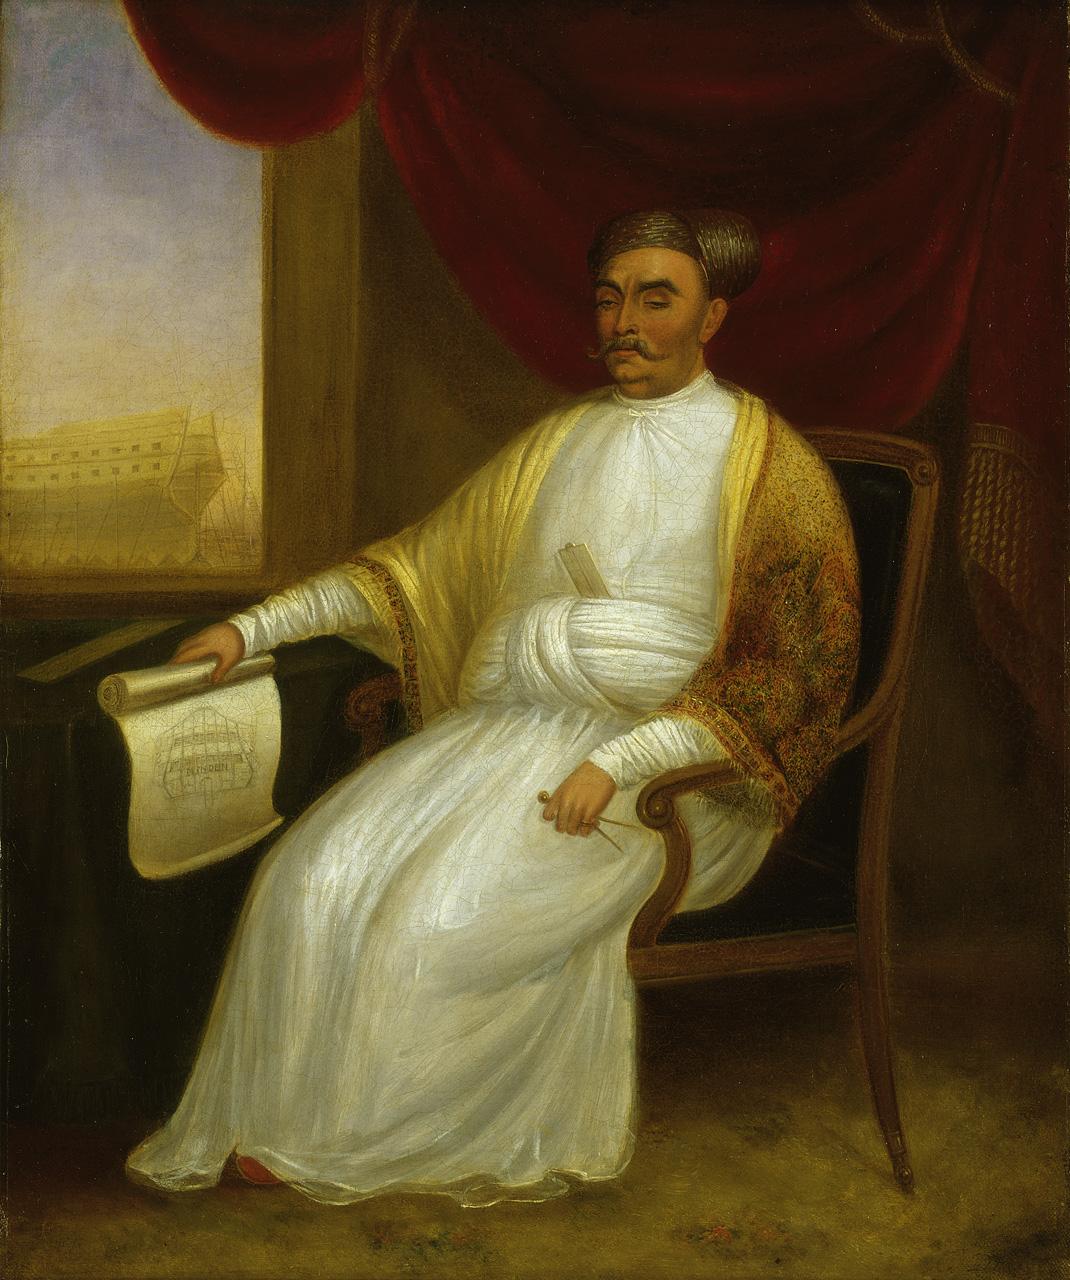 Portrait of a man dressed in a white robe and embroidered pashmina shawl